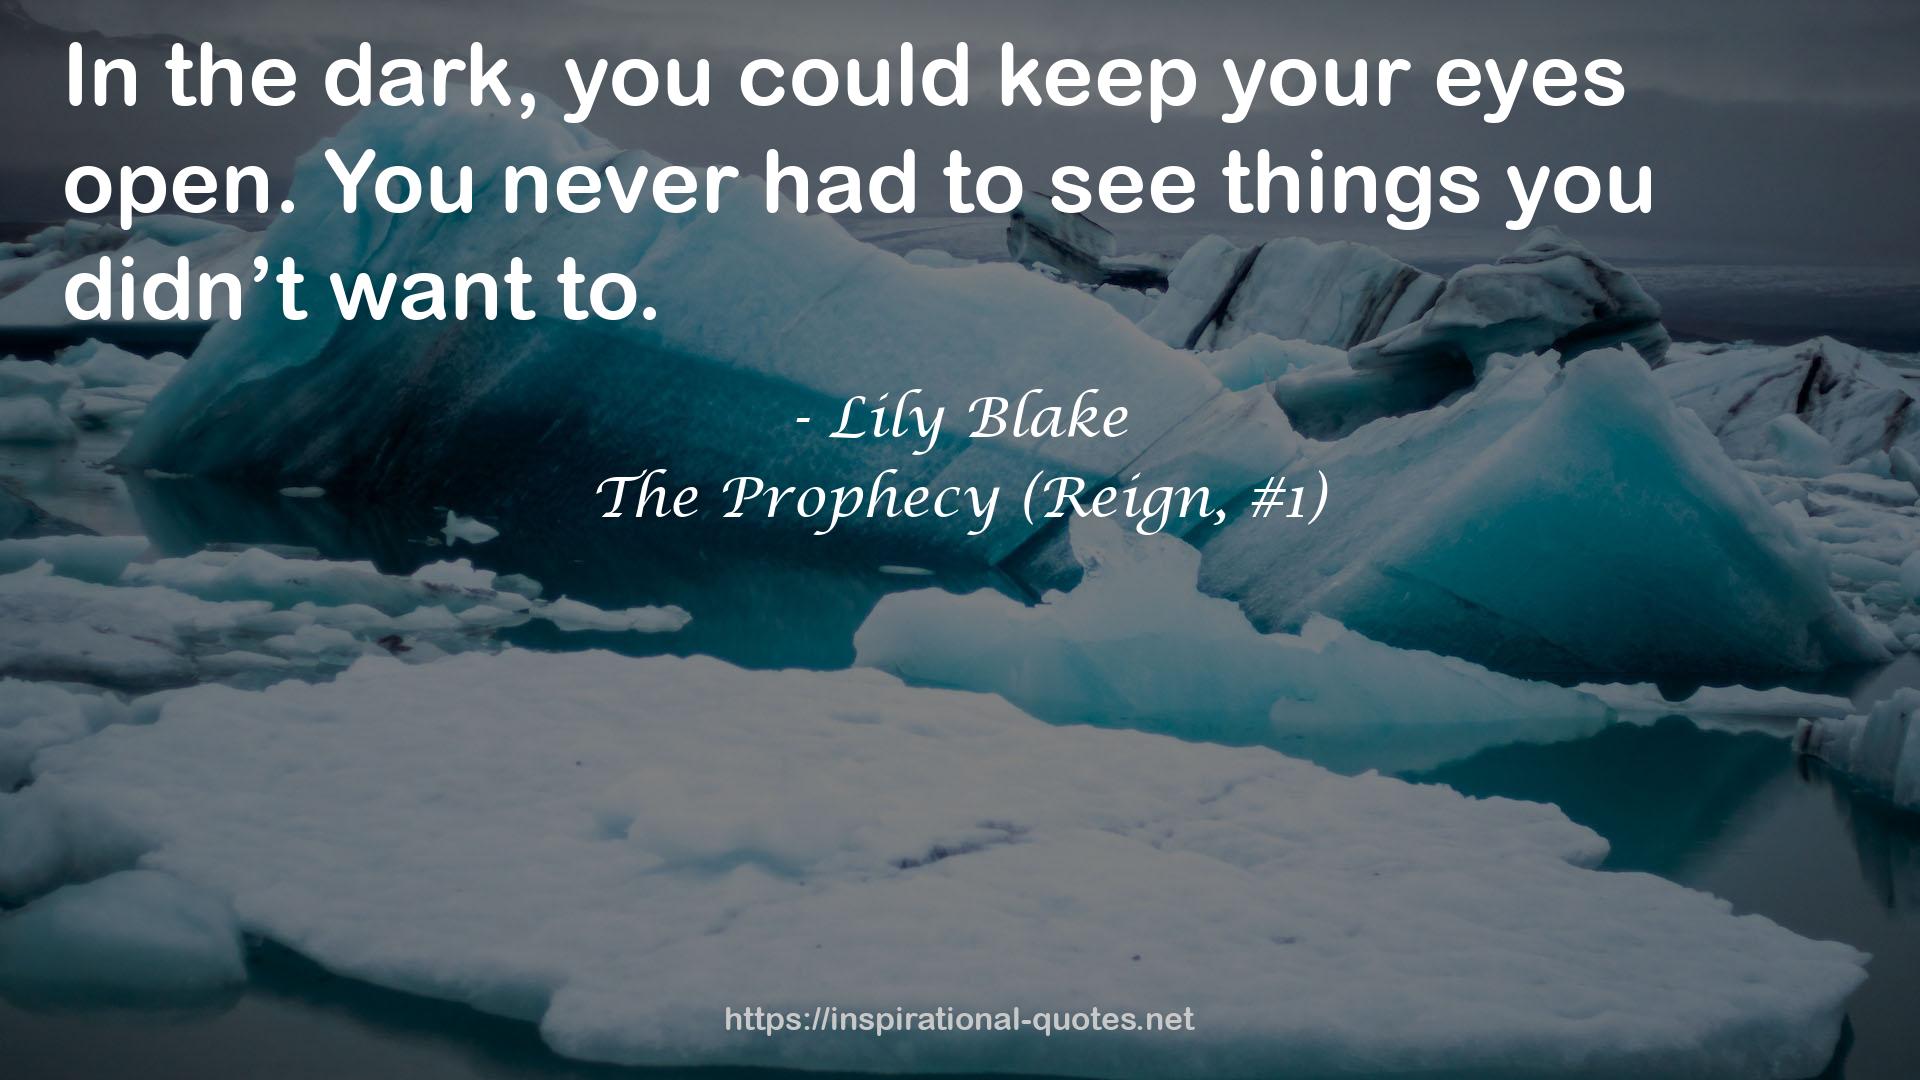 The Prophecy (Reign, #1) QUOTES